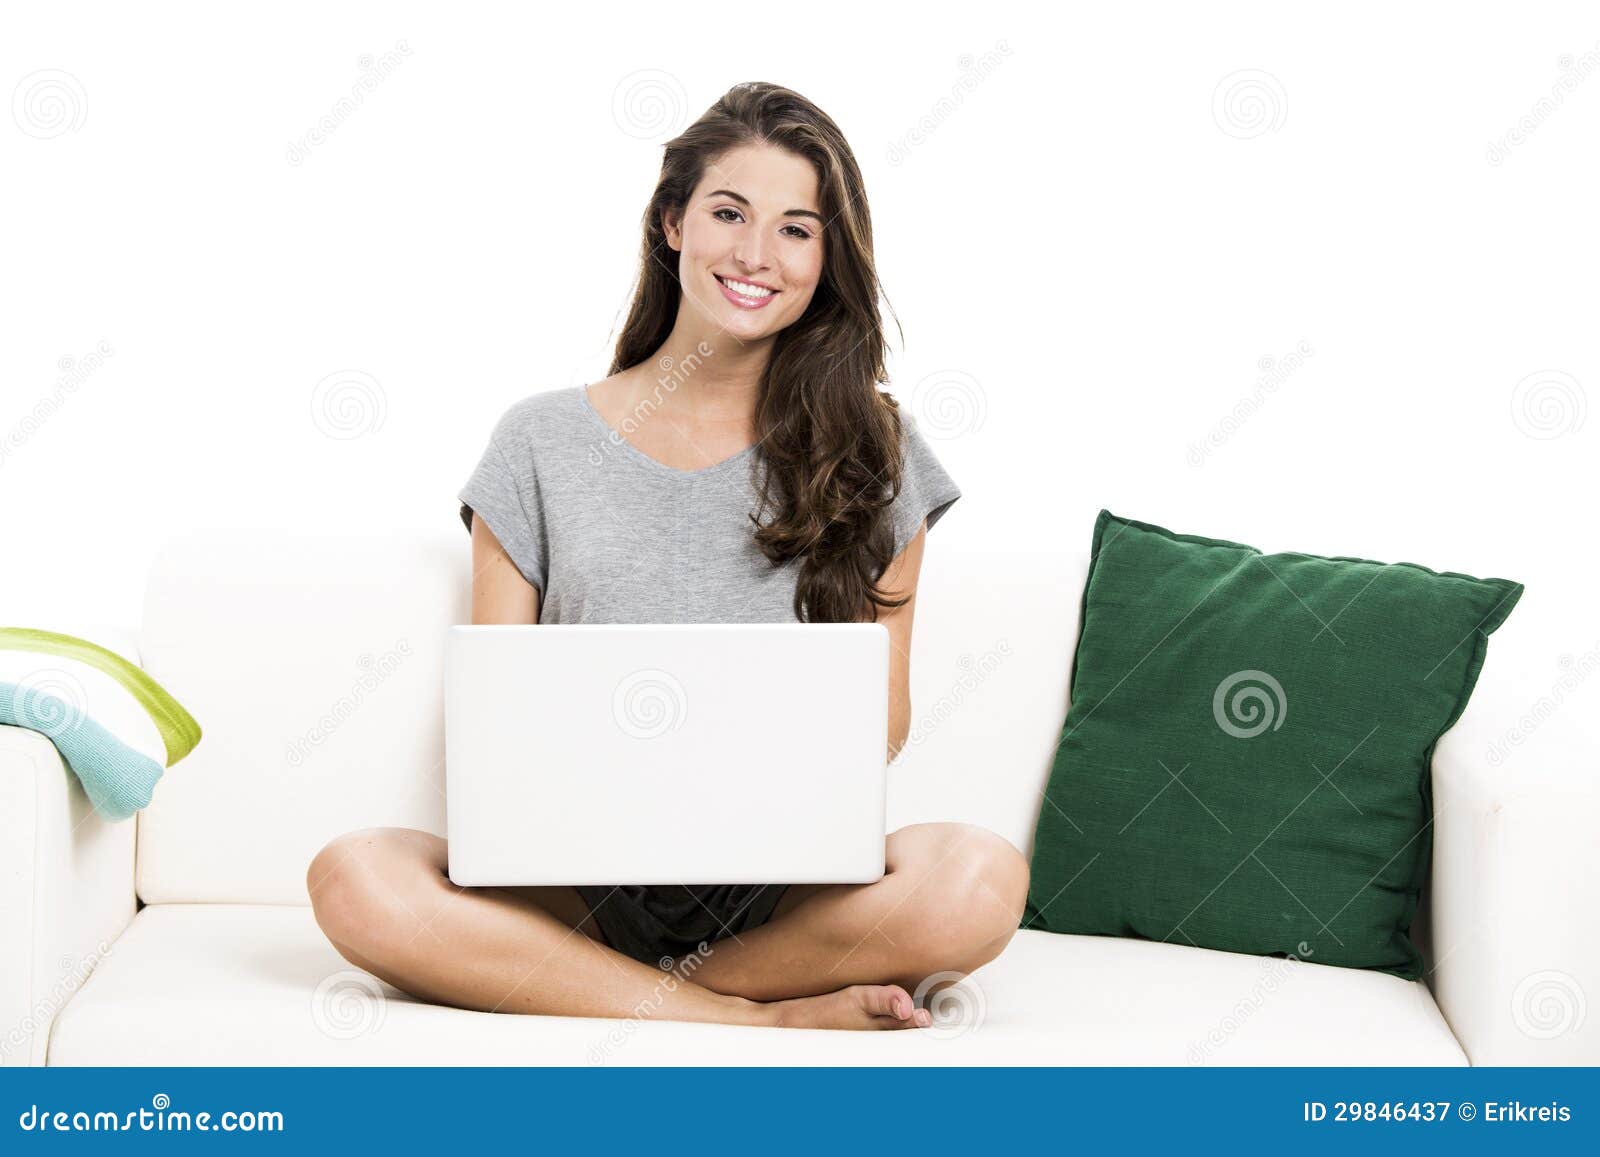 Working with a Laptop at Home Stock Image - Image of fresh, beauty ...